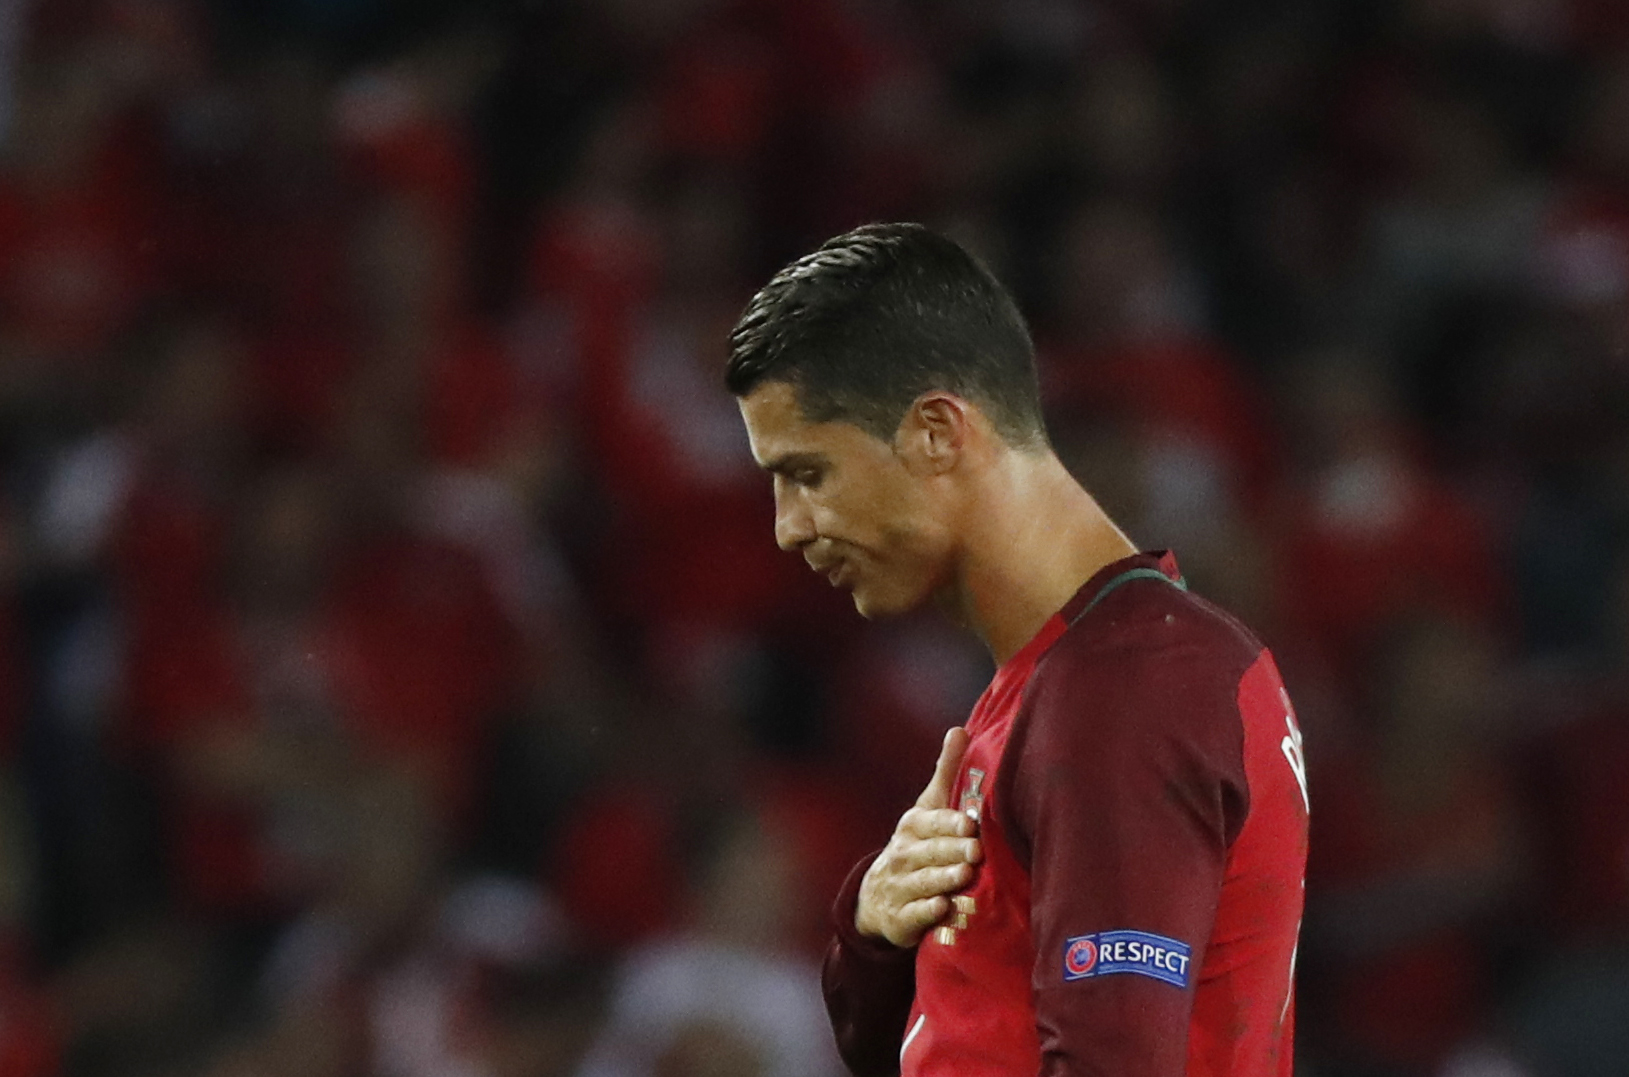 Euro 2016: Ronaldo misses penalty as Portugal held by Austria